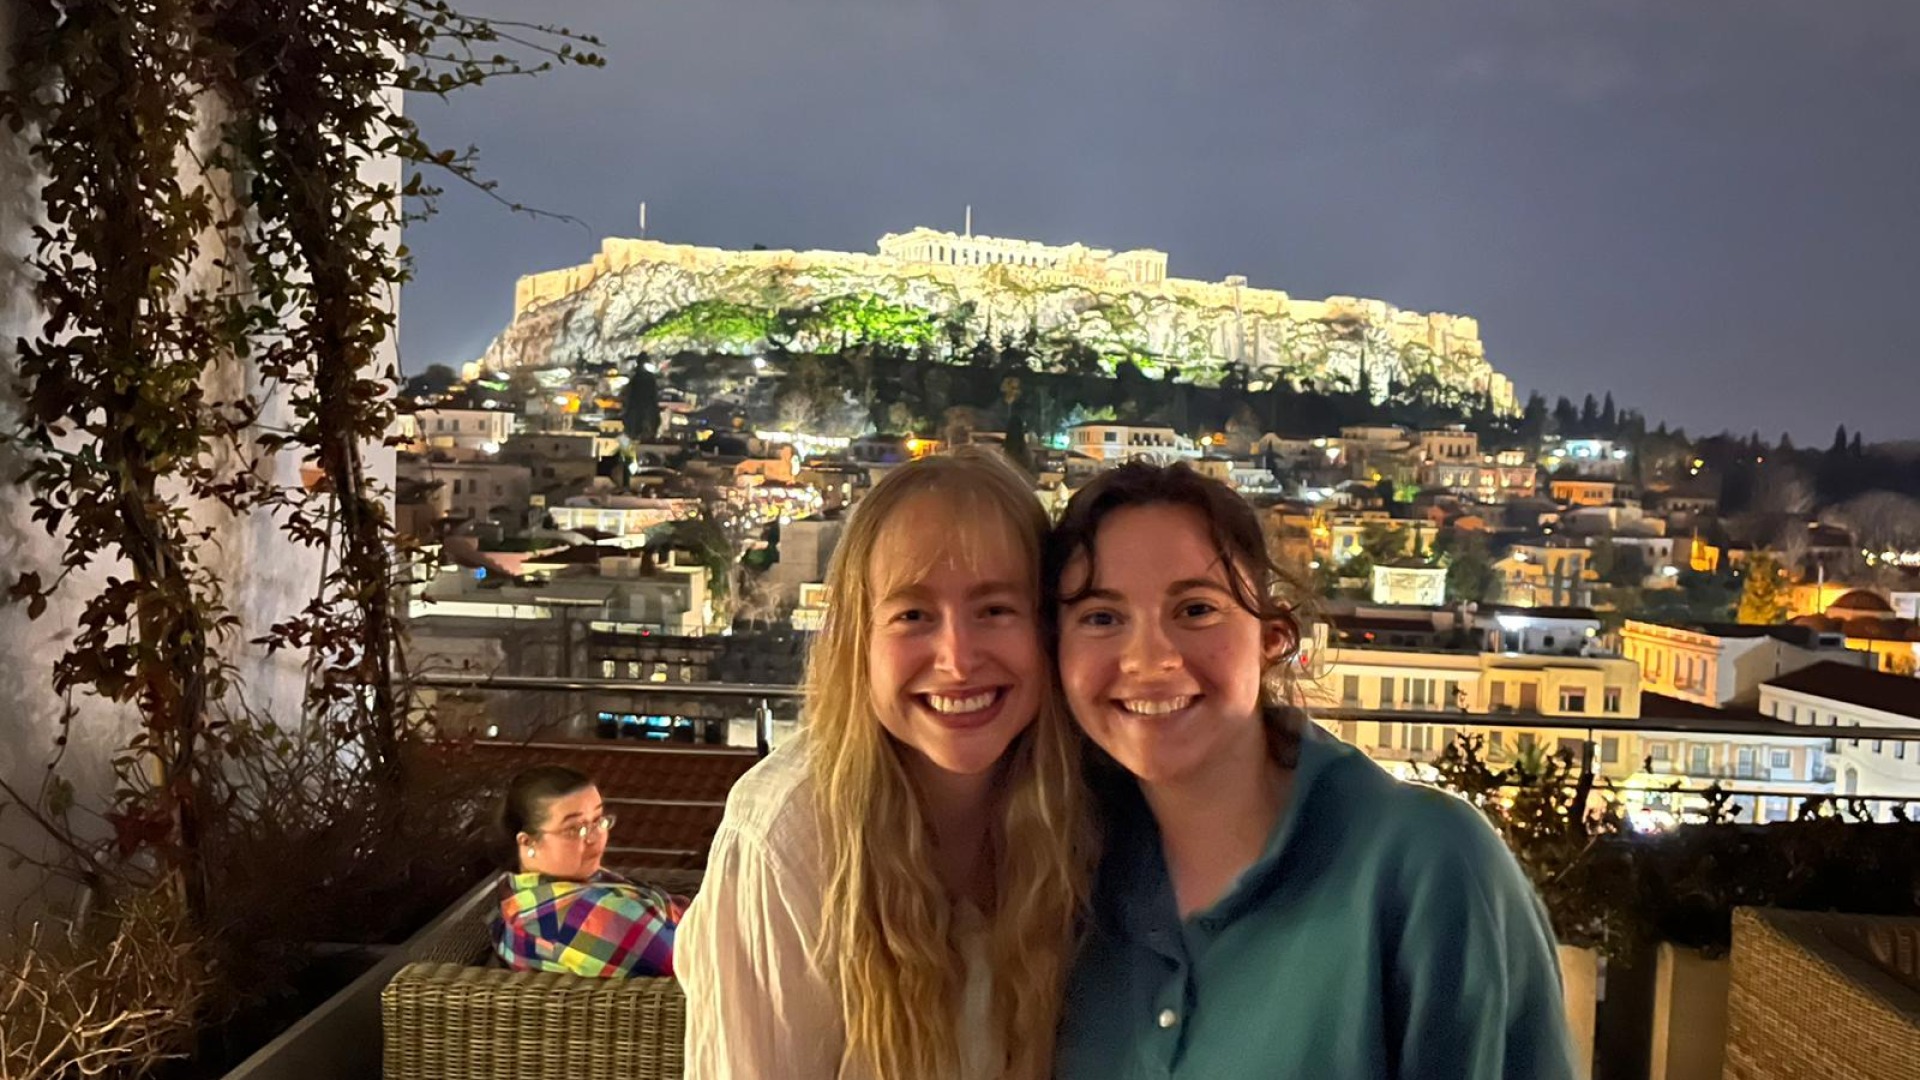 Elisabeth, my fellow Senior Interviewer, and I are on a hotel rooftop and we smile together with beautifully lit Athens in the background